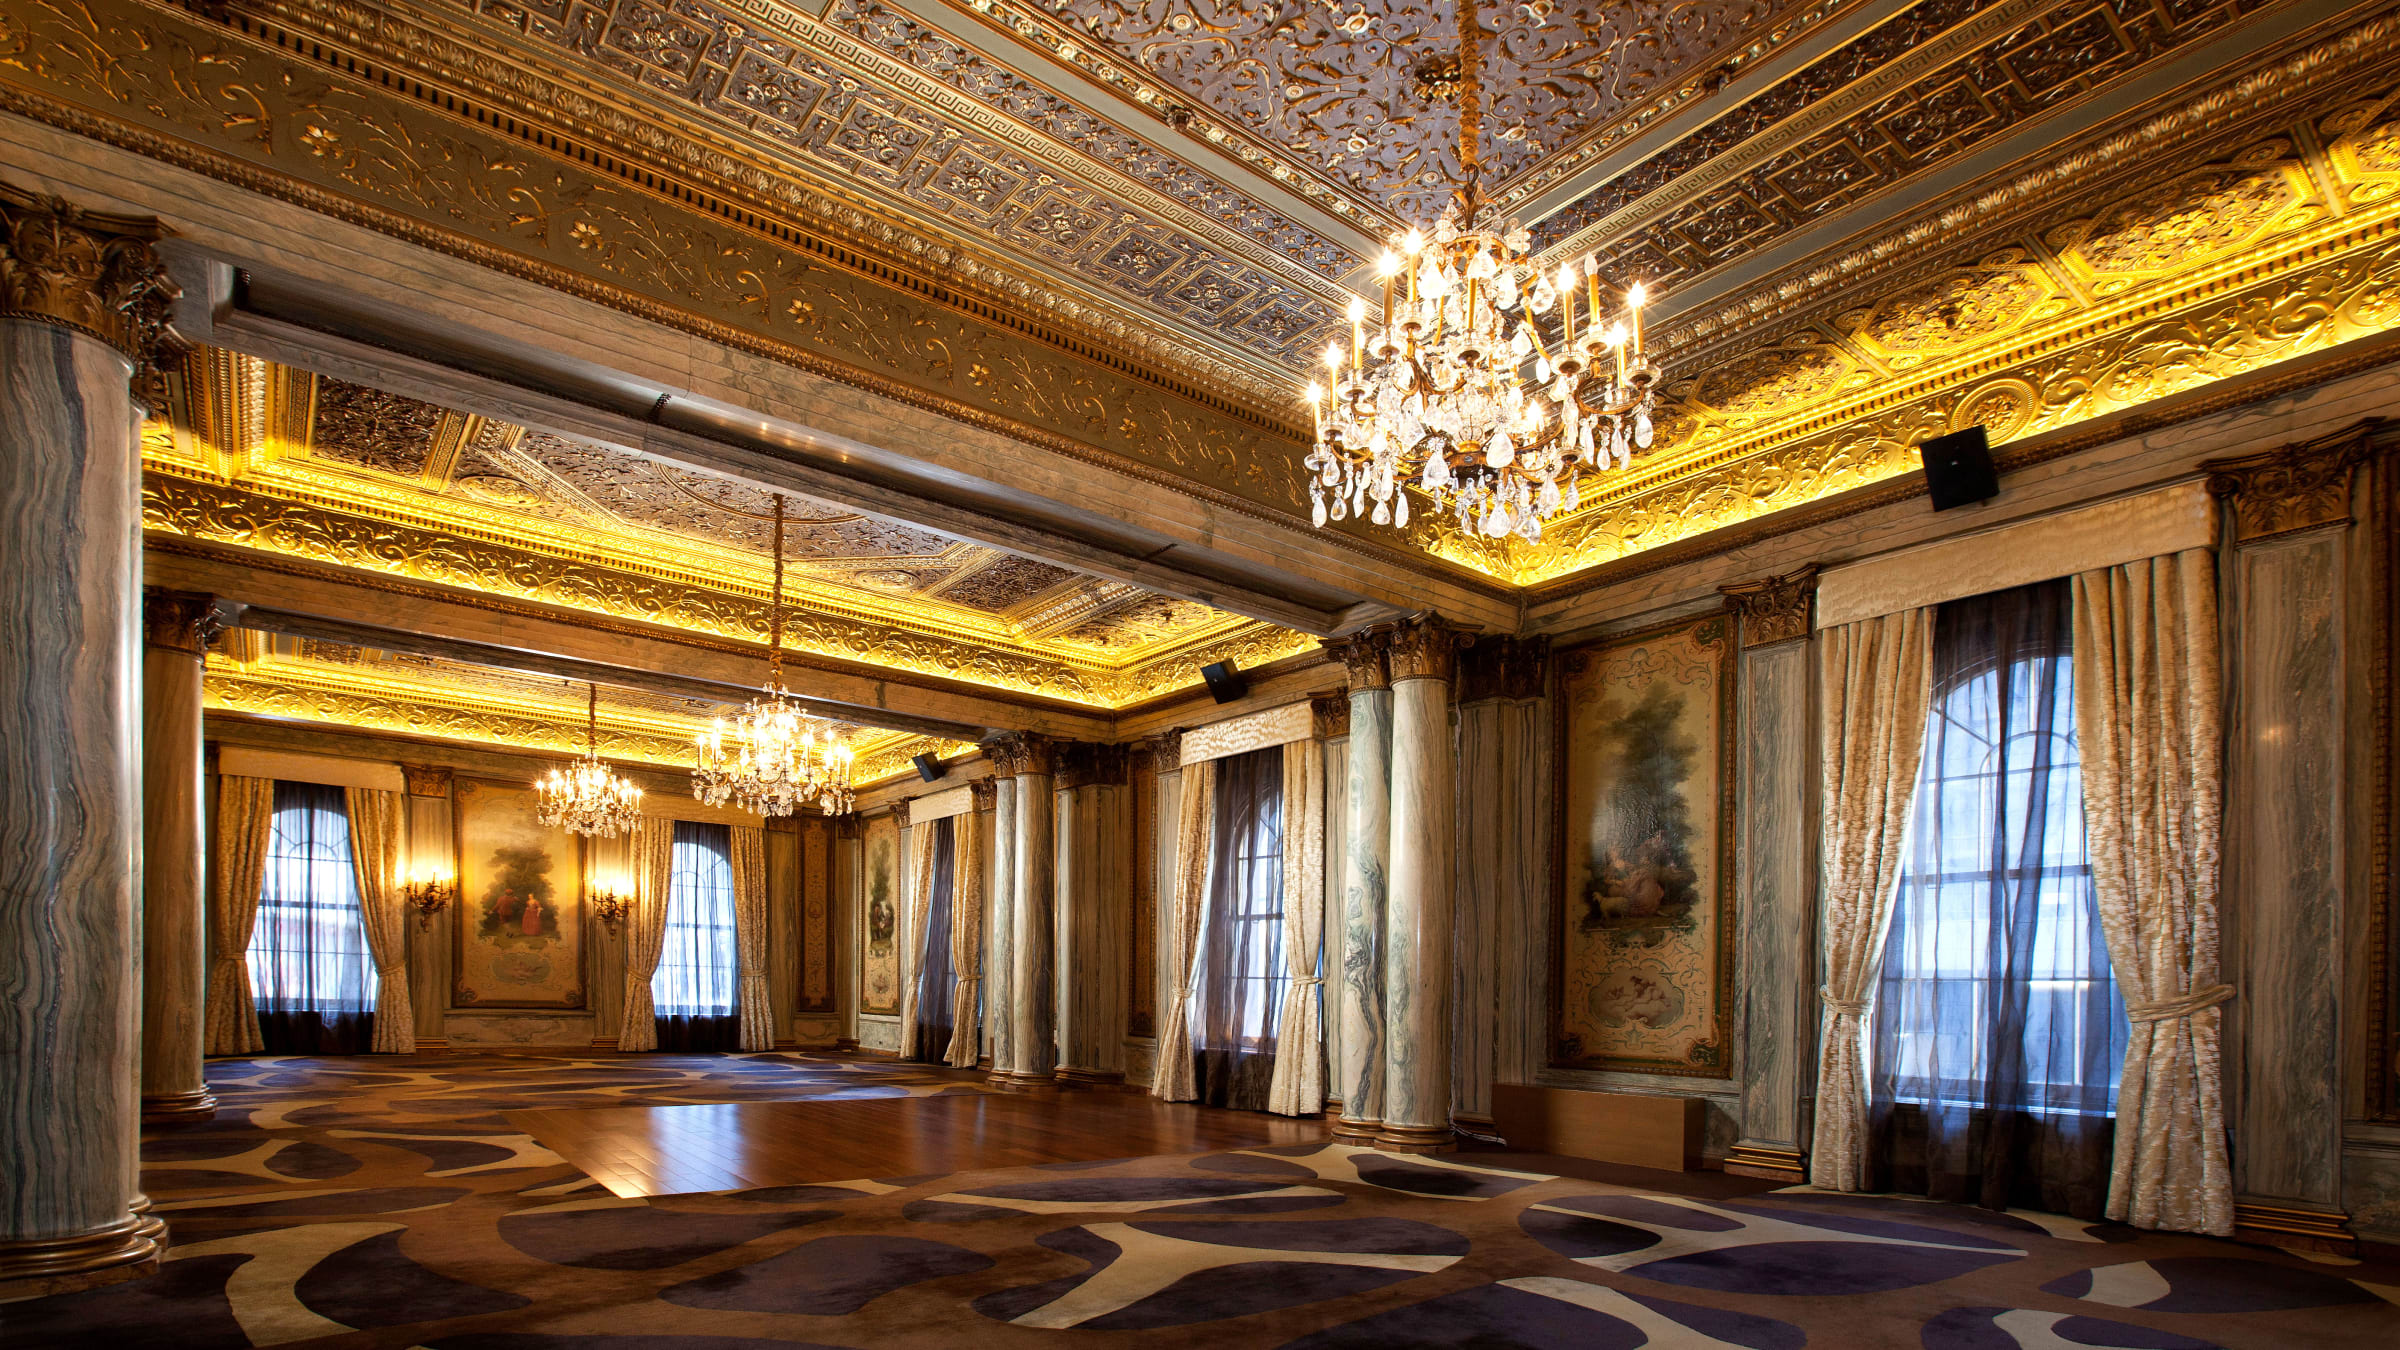 Villard House, the NYC Mansion of Doomed Railroad Tycoon, Now Open for Tours by Lotte New York Palace Hotel picture